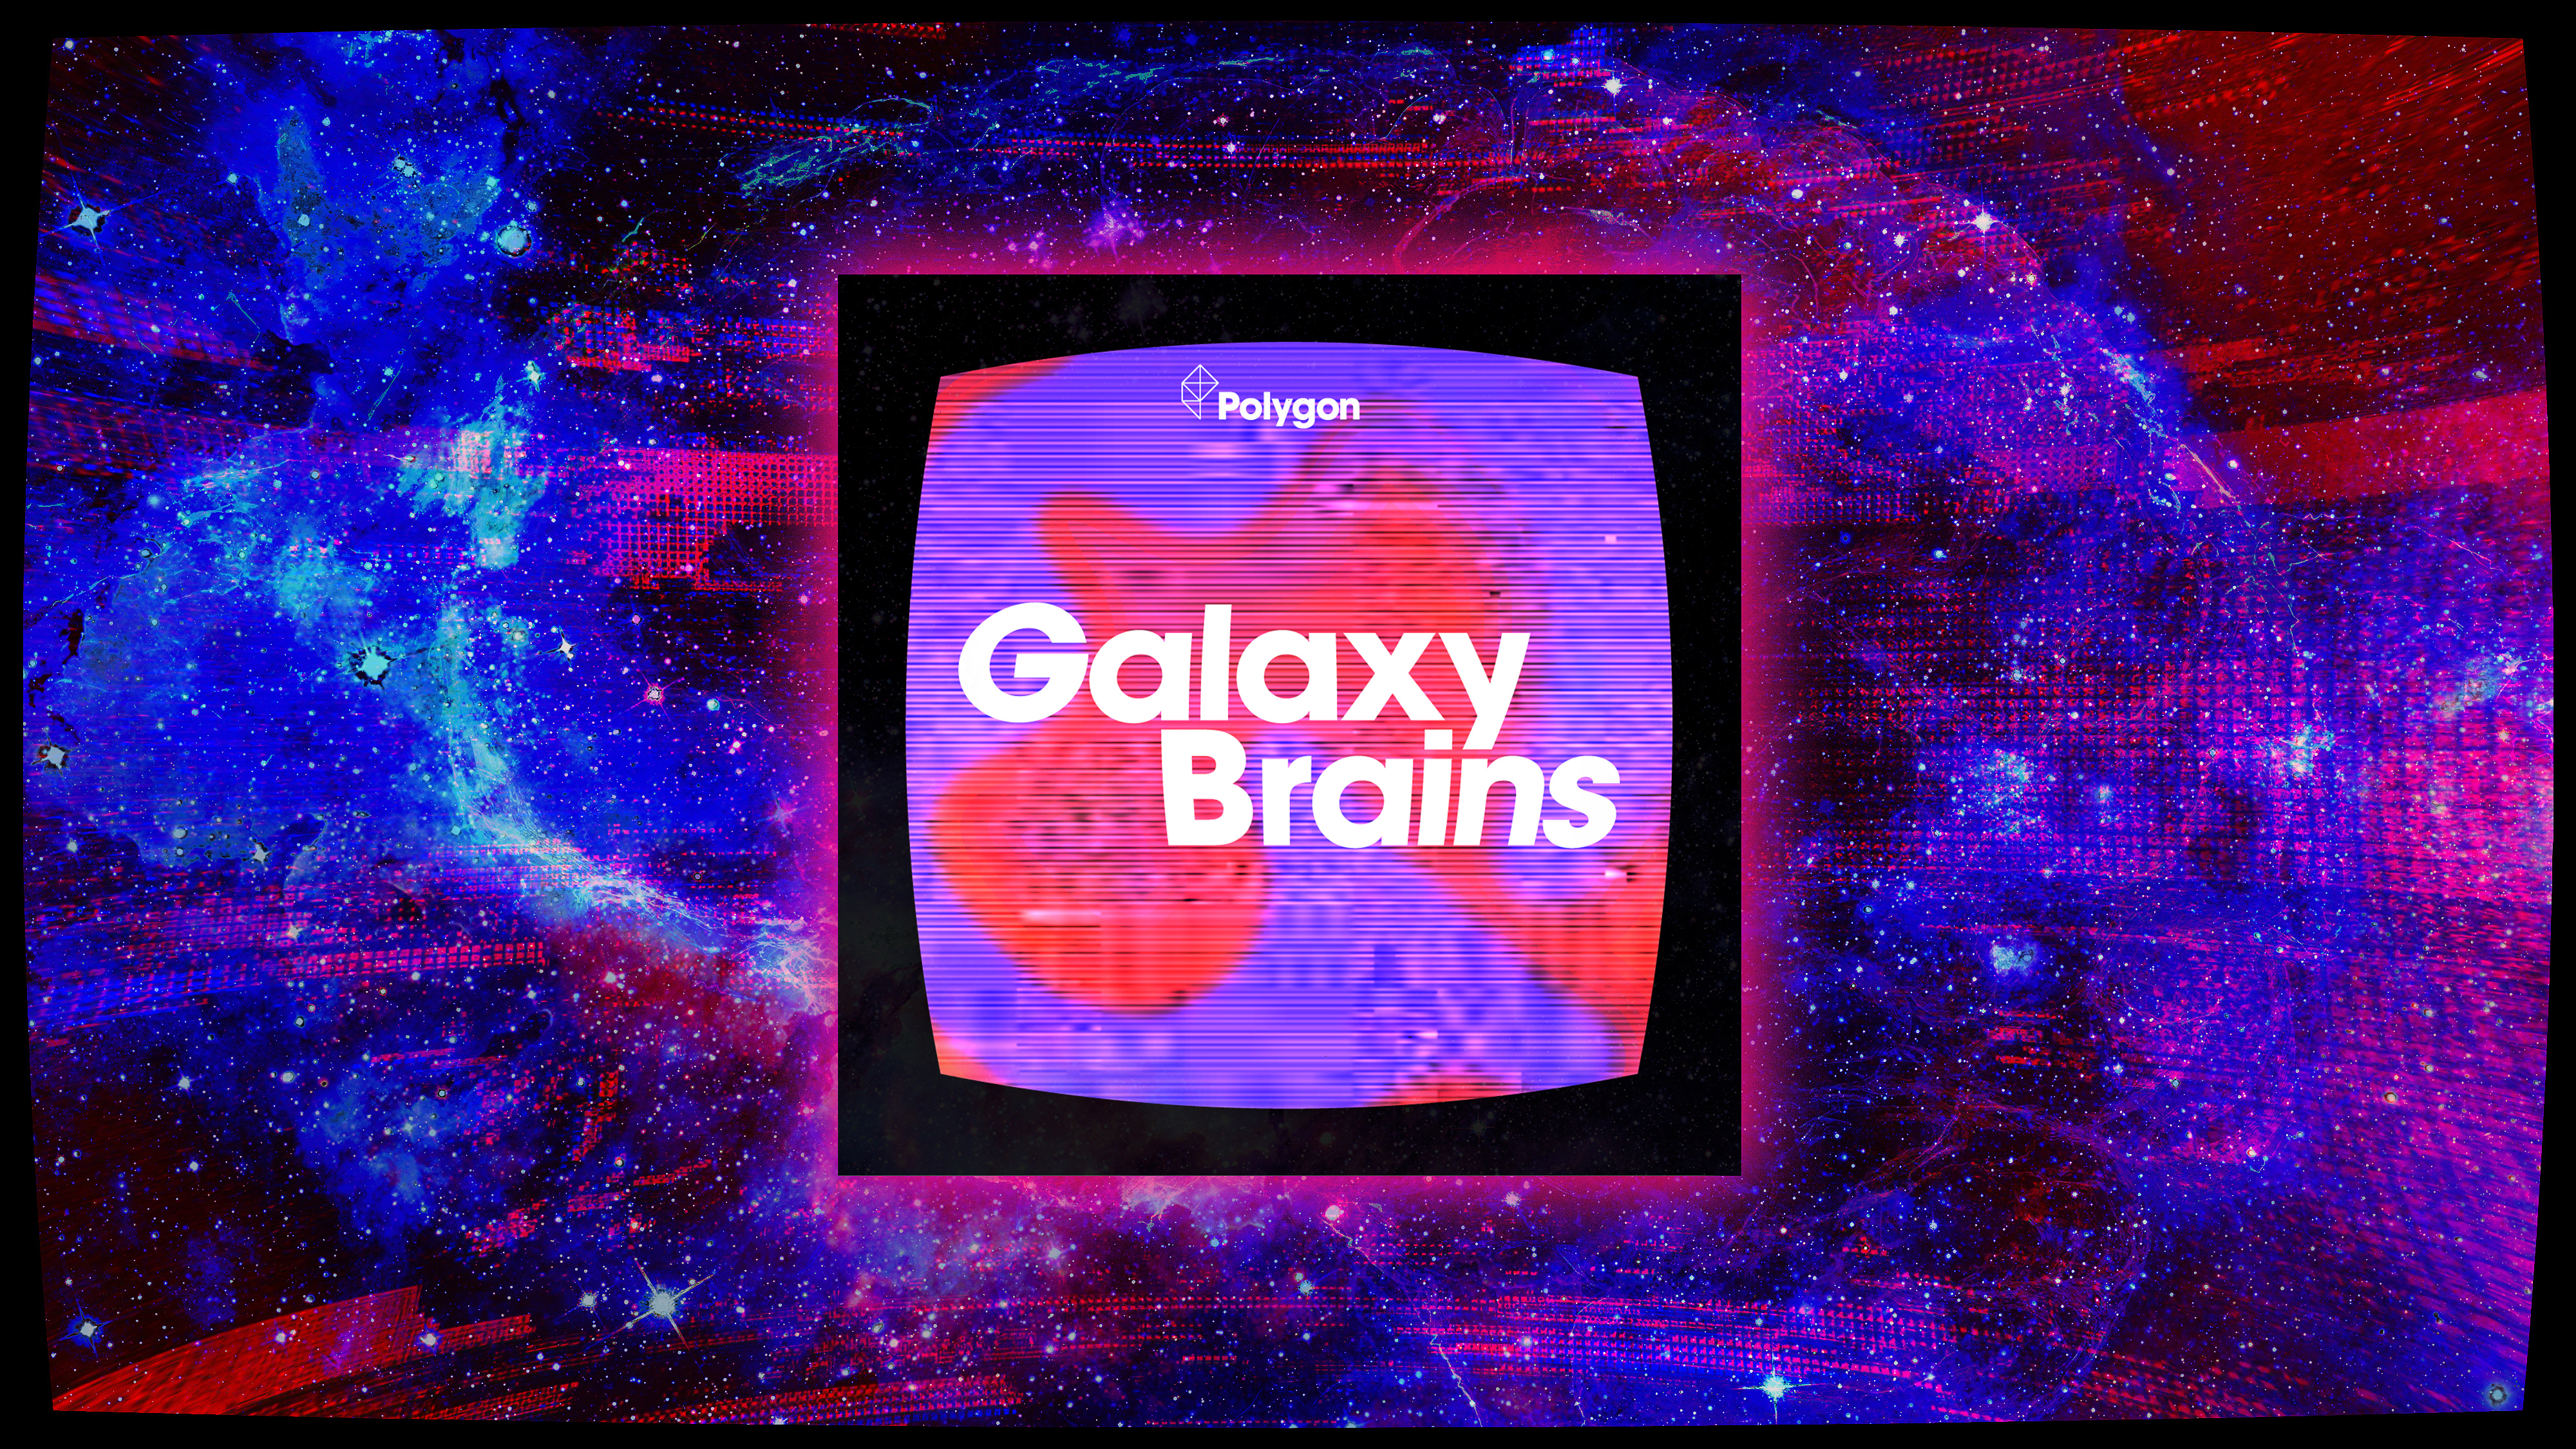 Galaxy Brains logo in a glowing square on a glitchy red/purple background